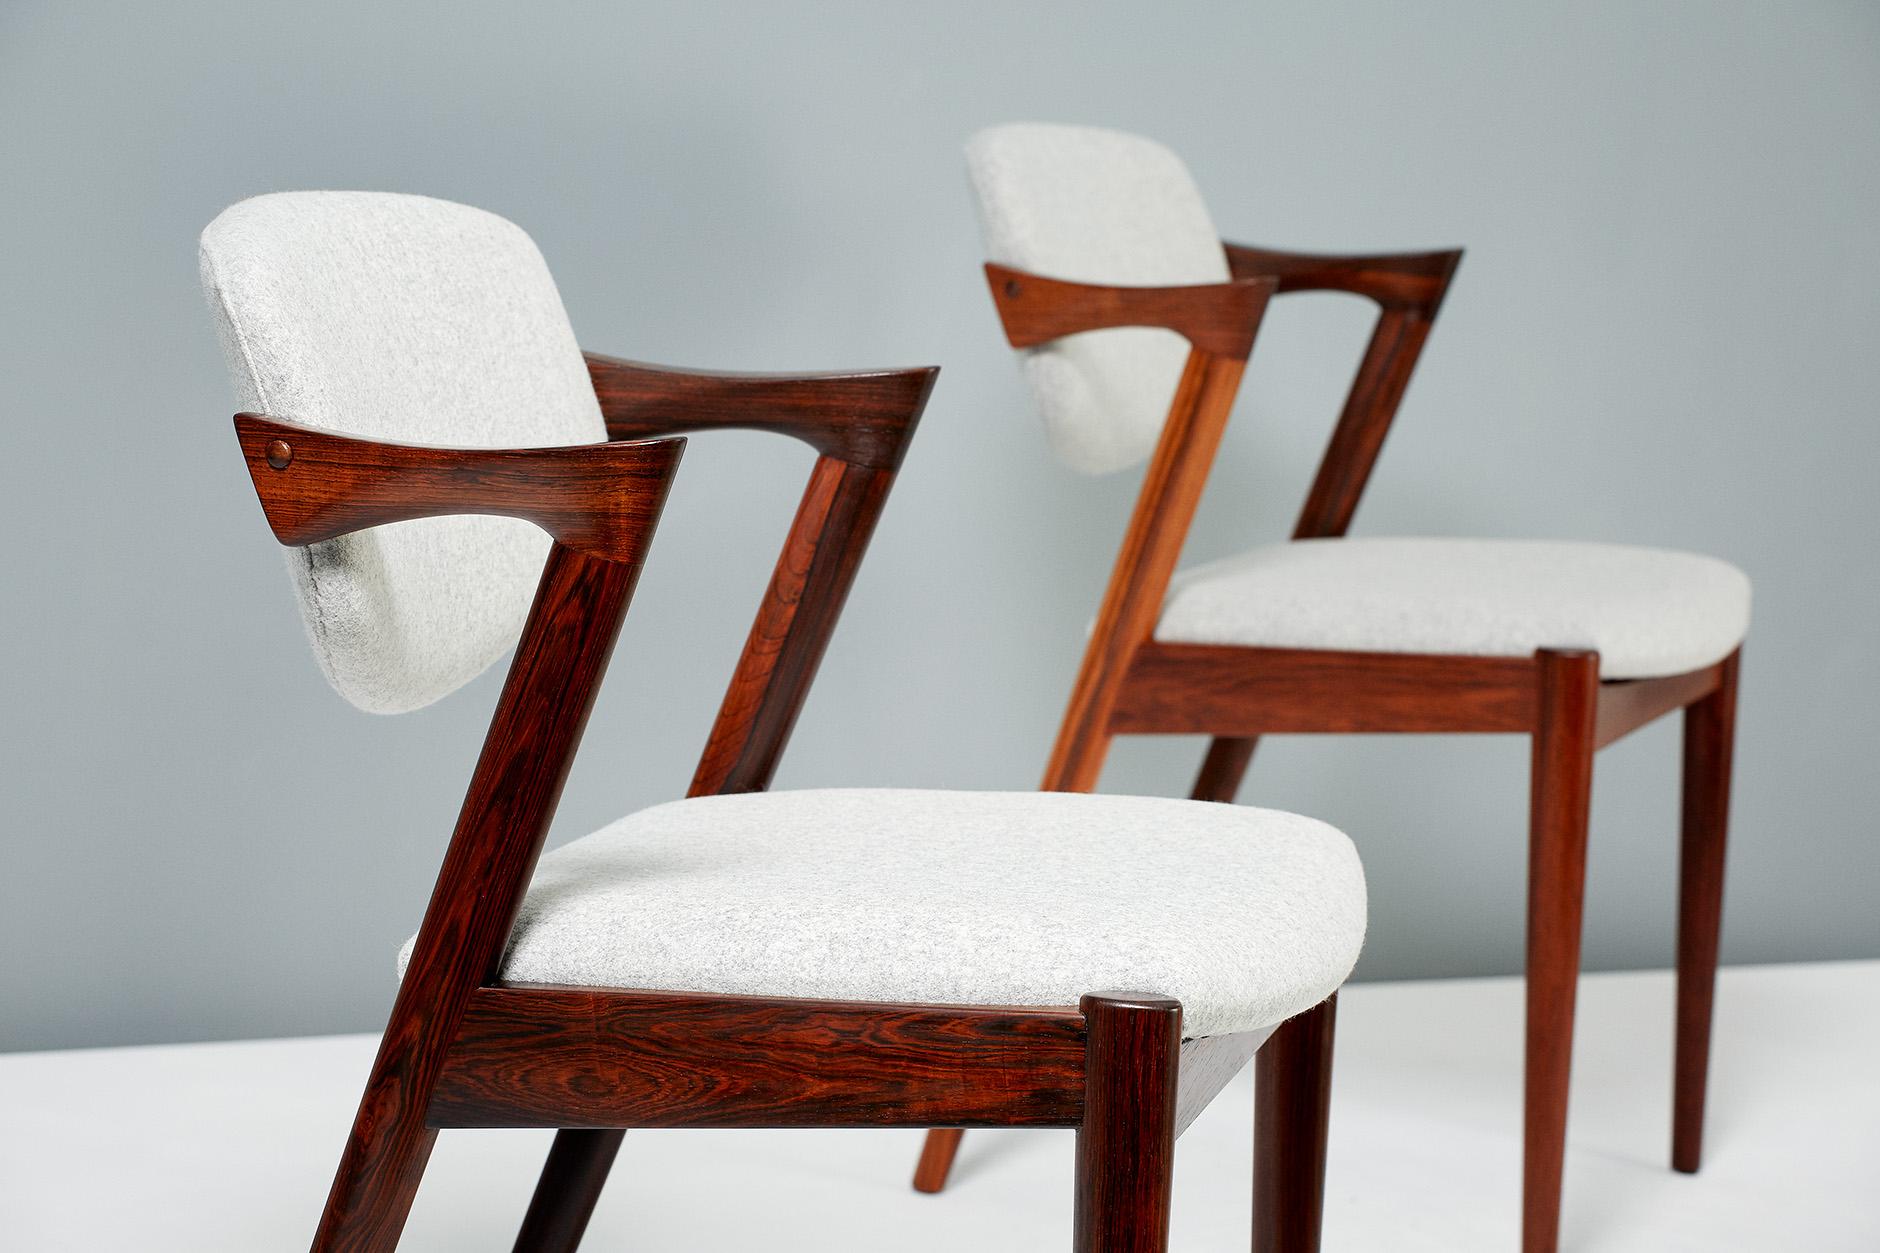 Kai Kristiansen
Model 42 dining chairs, 1956.

Set of 8 dining chairs produced by Skovman Andersen for the Illum Bolighus department store in Copenhagen. Refinished rosewood frames with seat and back reupholstered with Kvadrat Divina soft wool